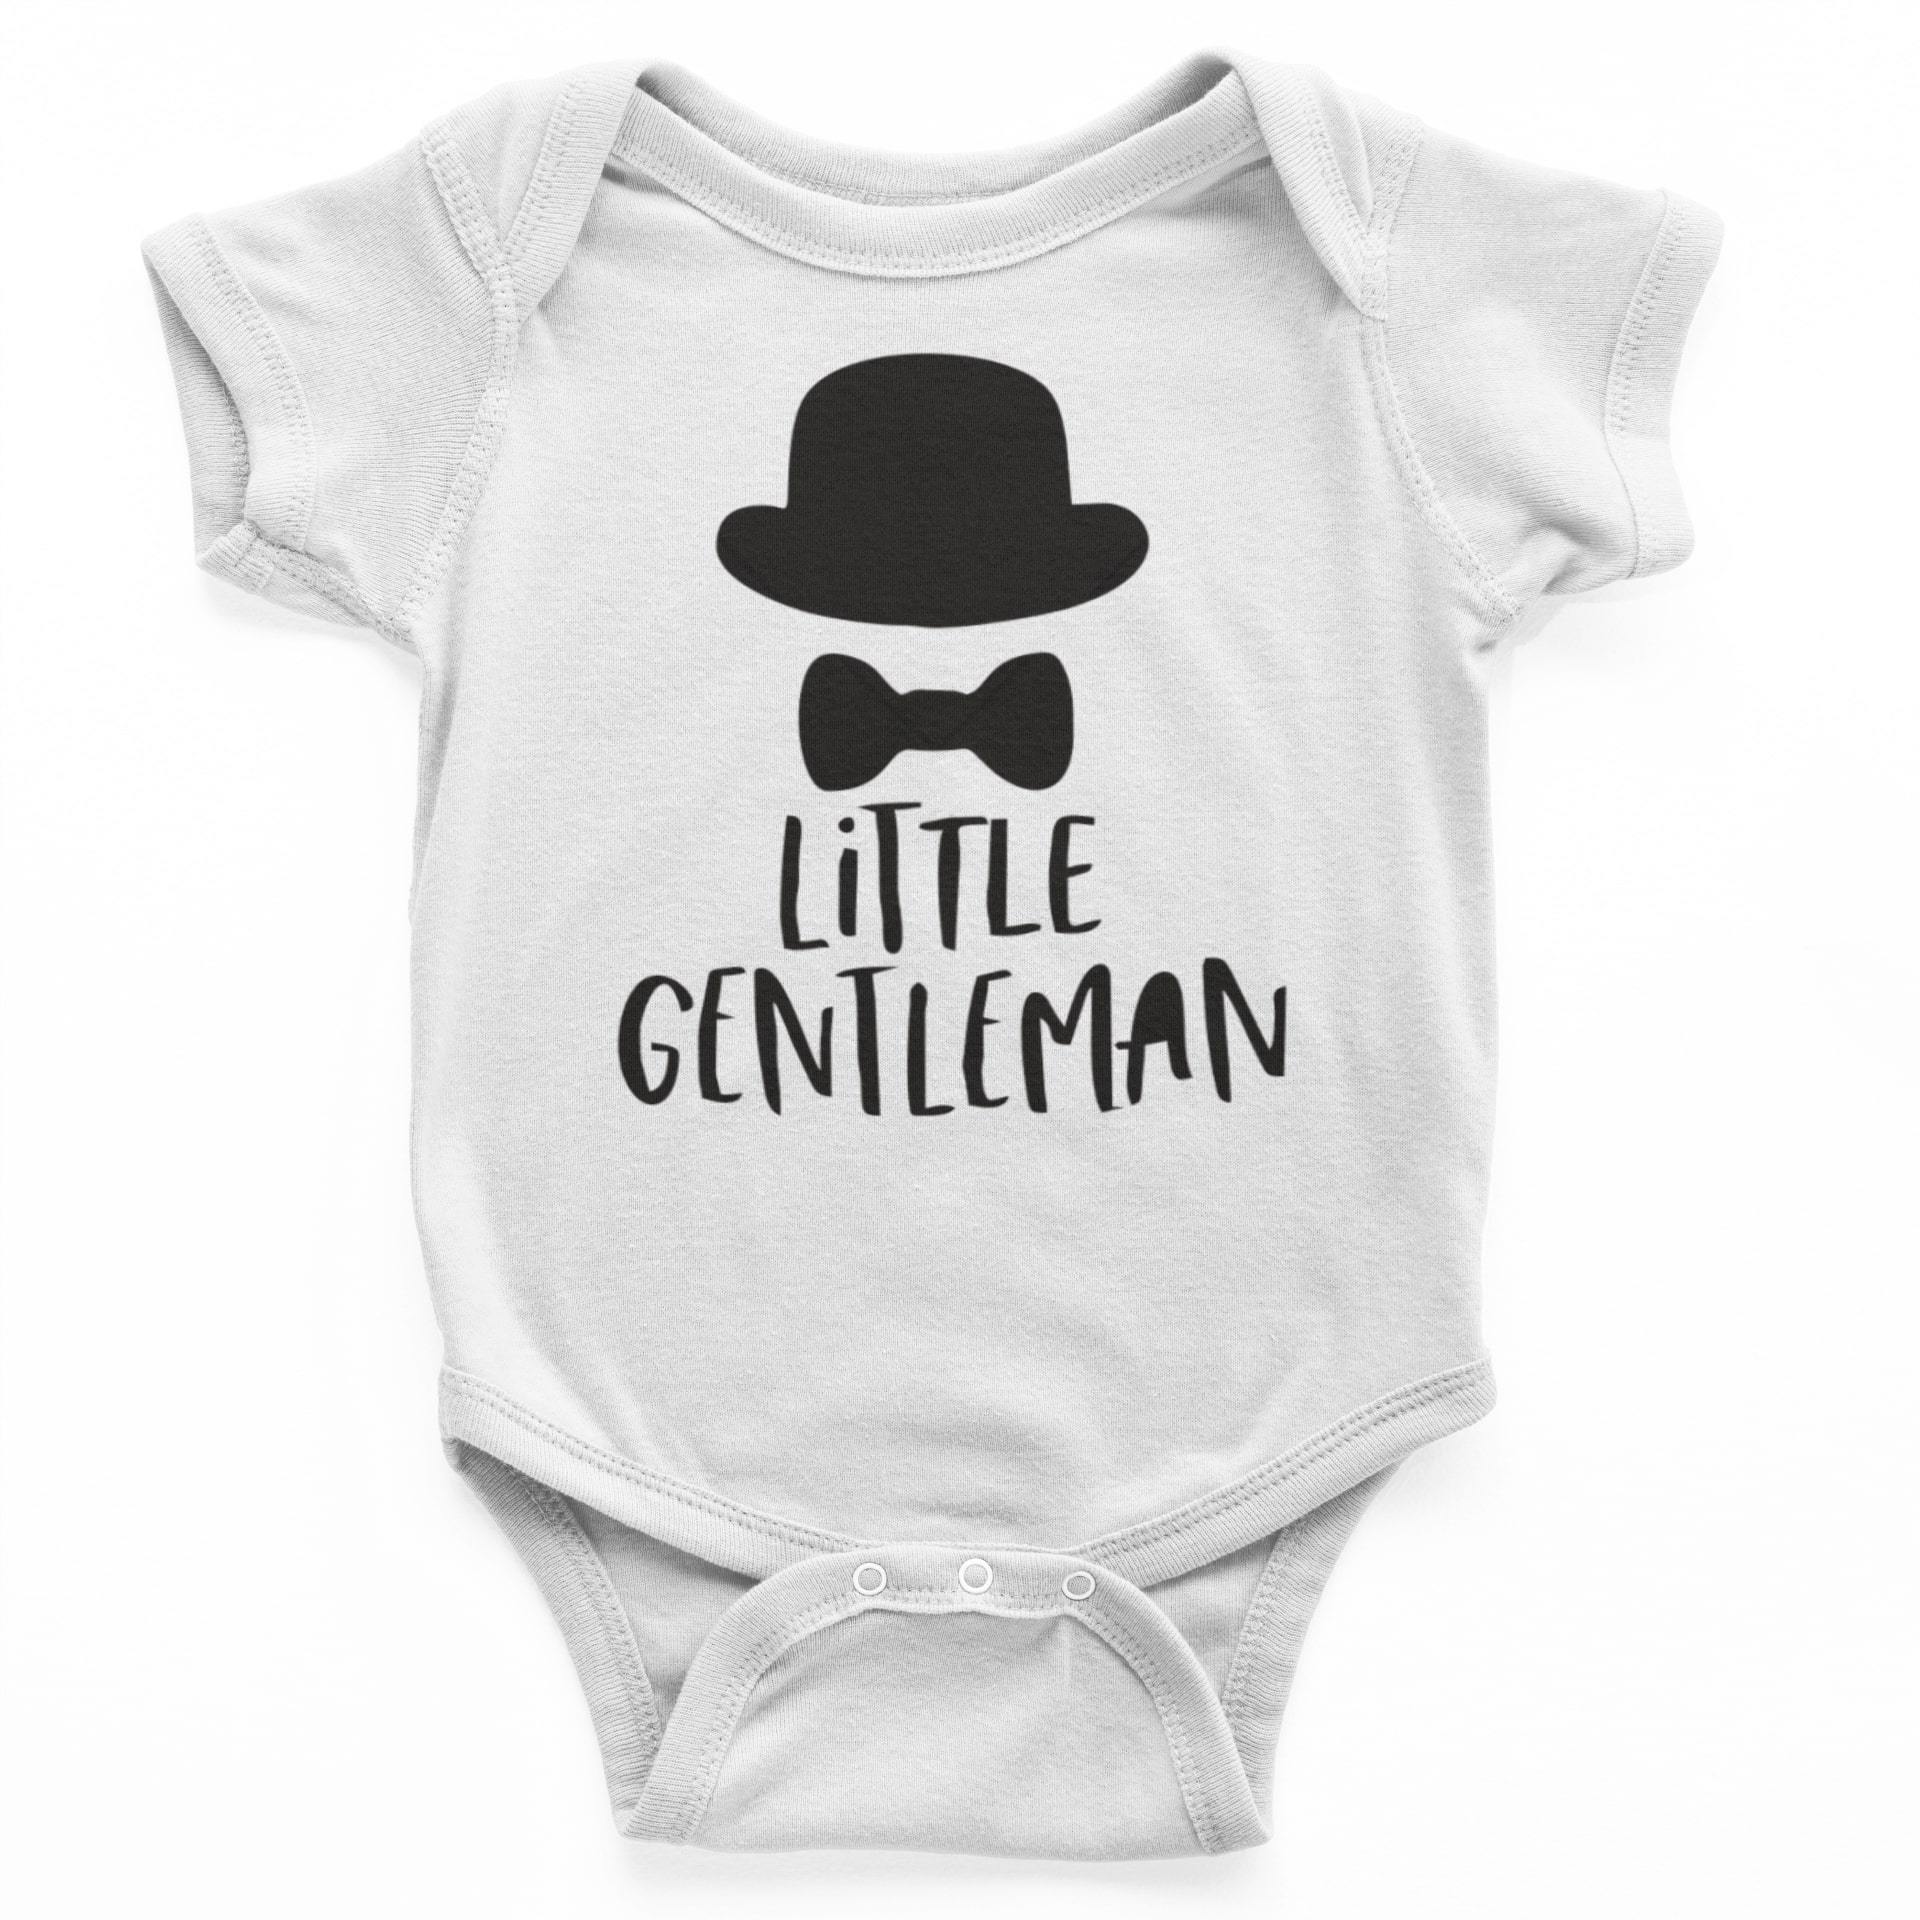 thelegalgang,Little Gentleman Rompers for Babies,.